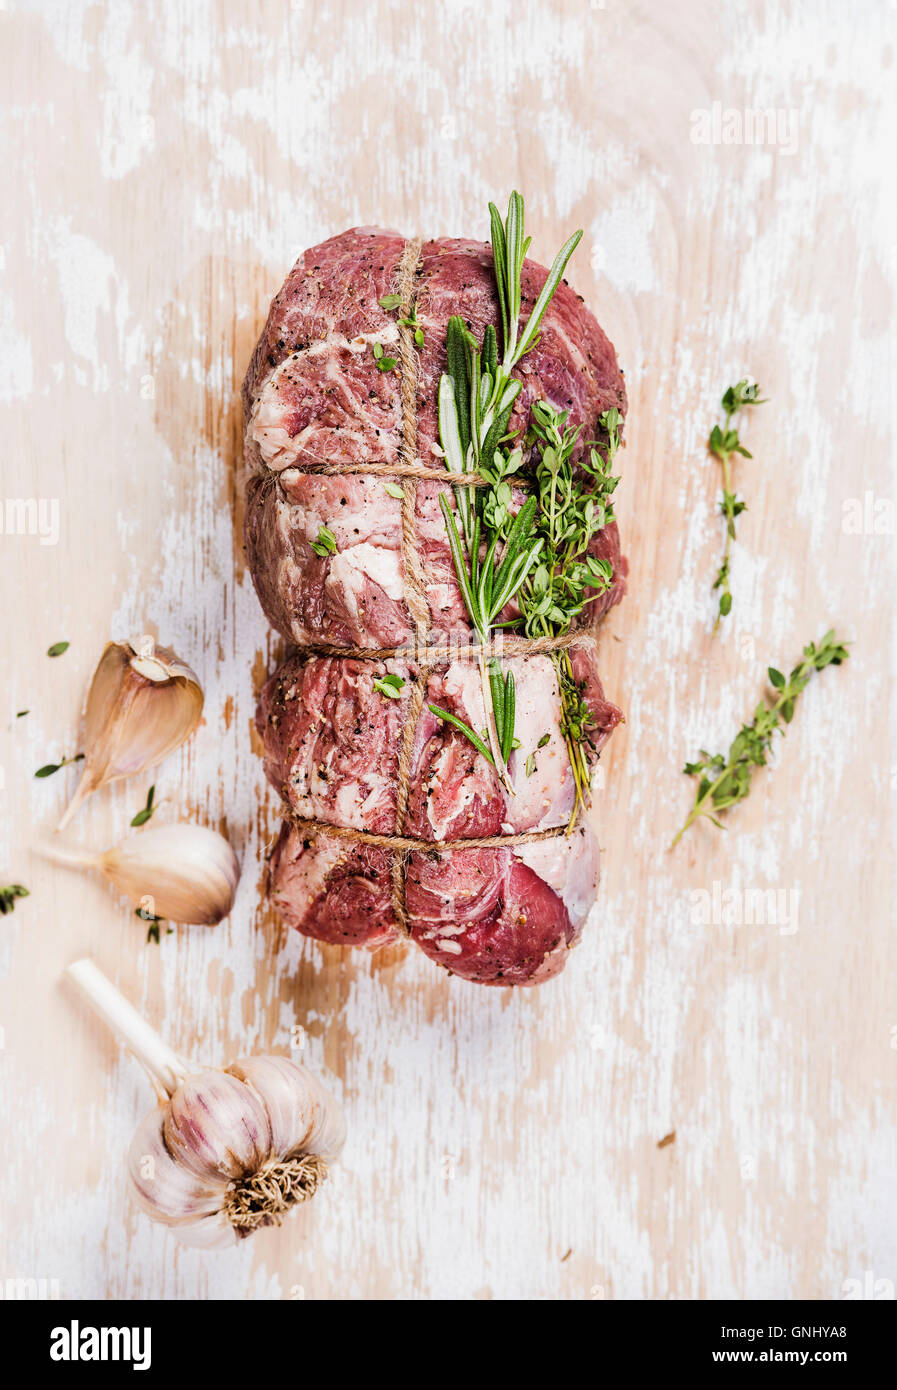 Raw uncooked roastbeef meat cut with rosemary, thyme and garlic on old white painted wooden background, top view, selective focu Stock Photo